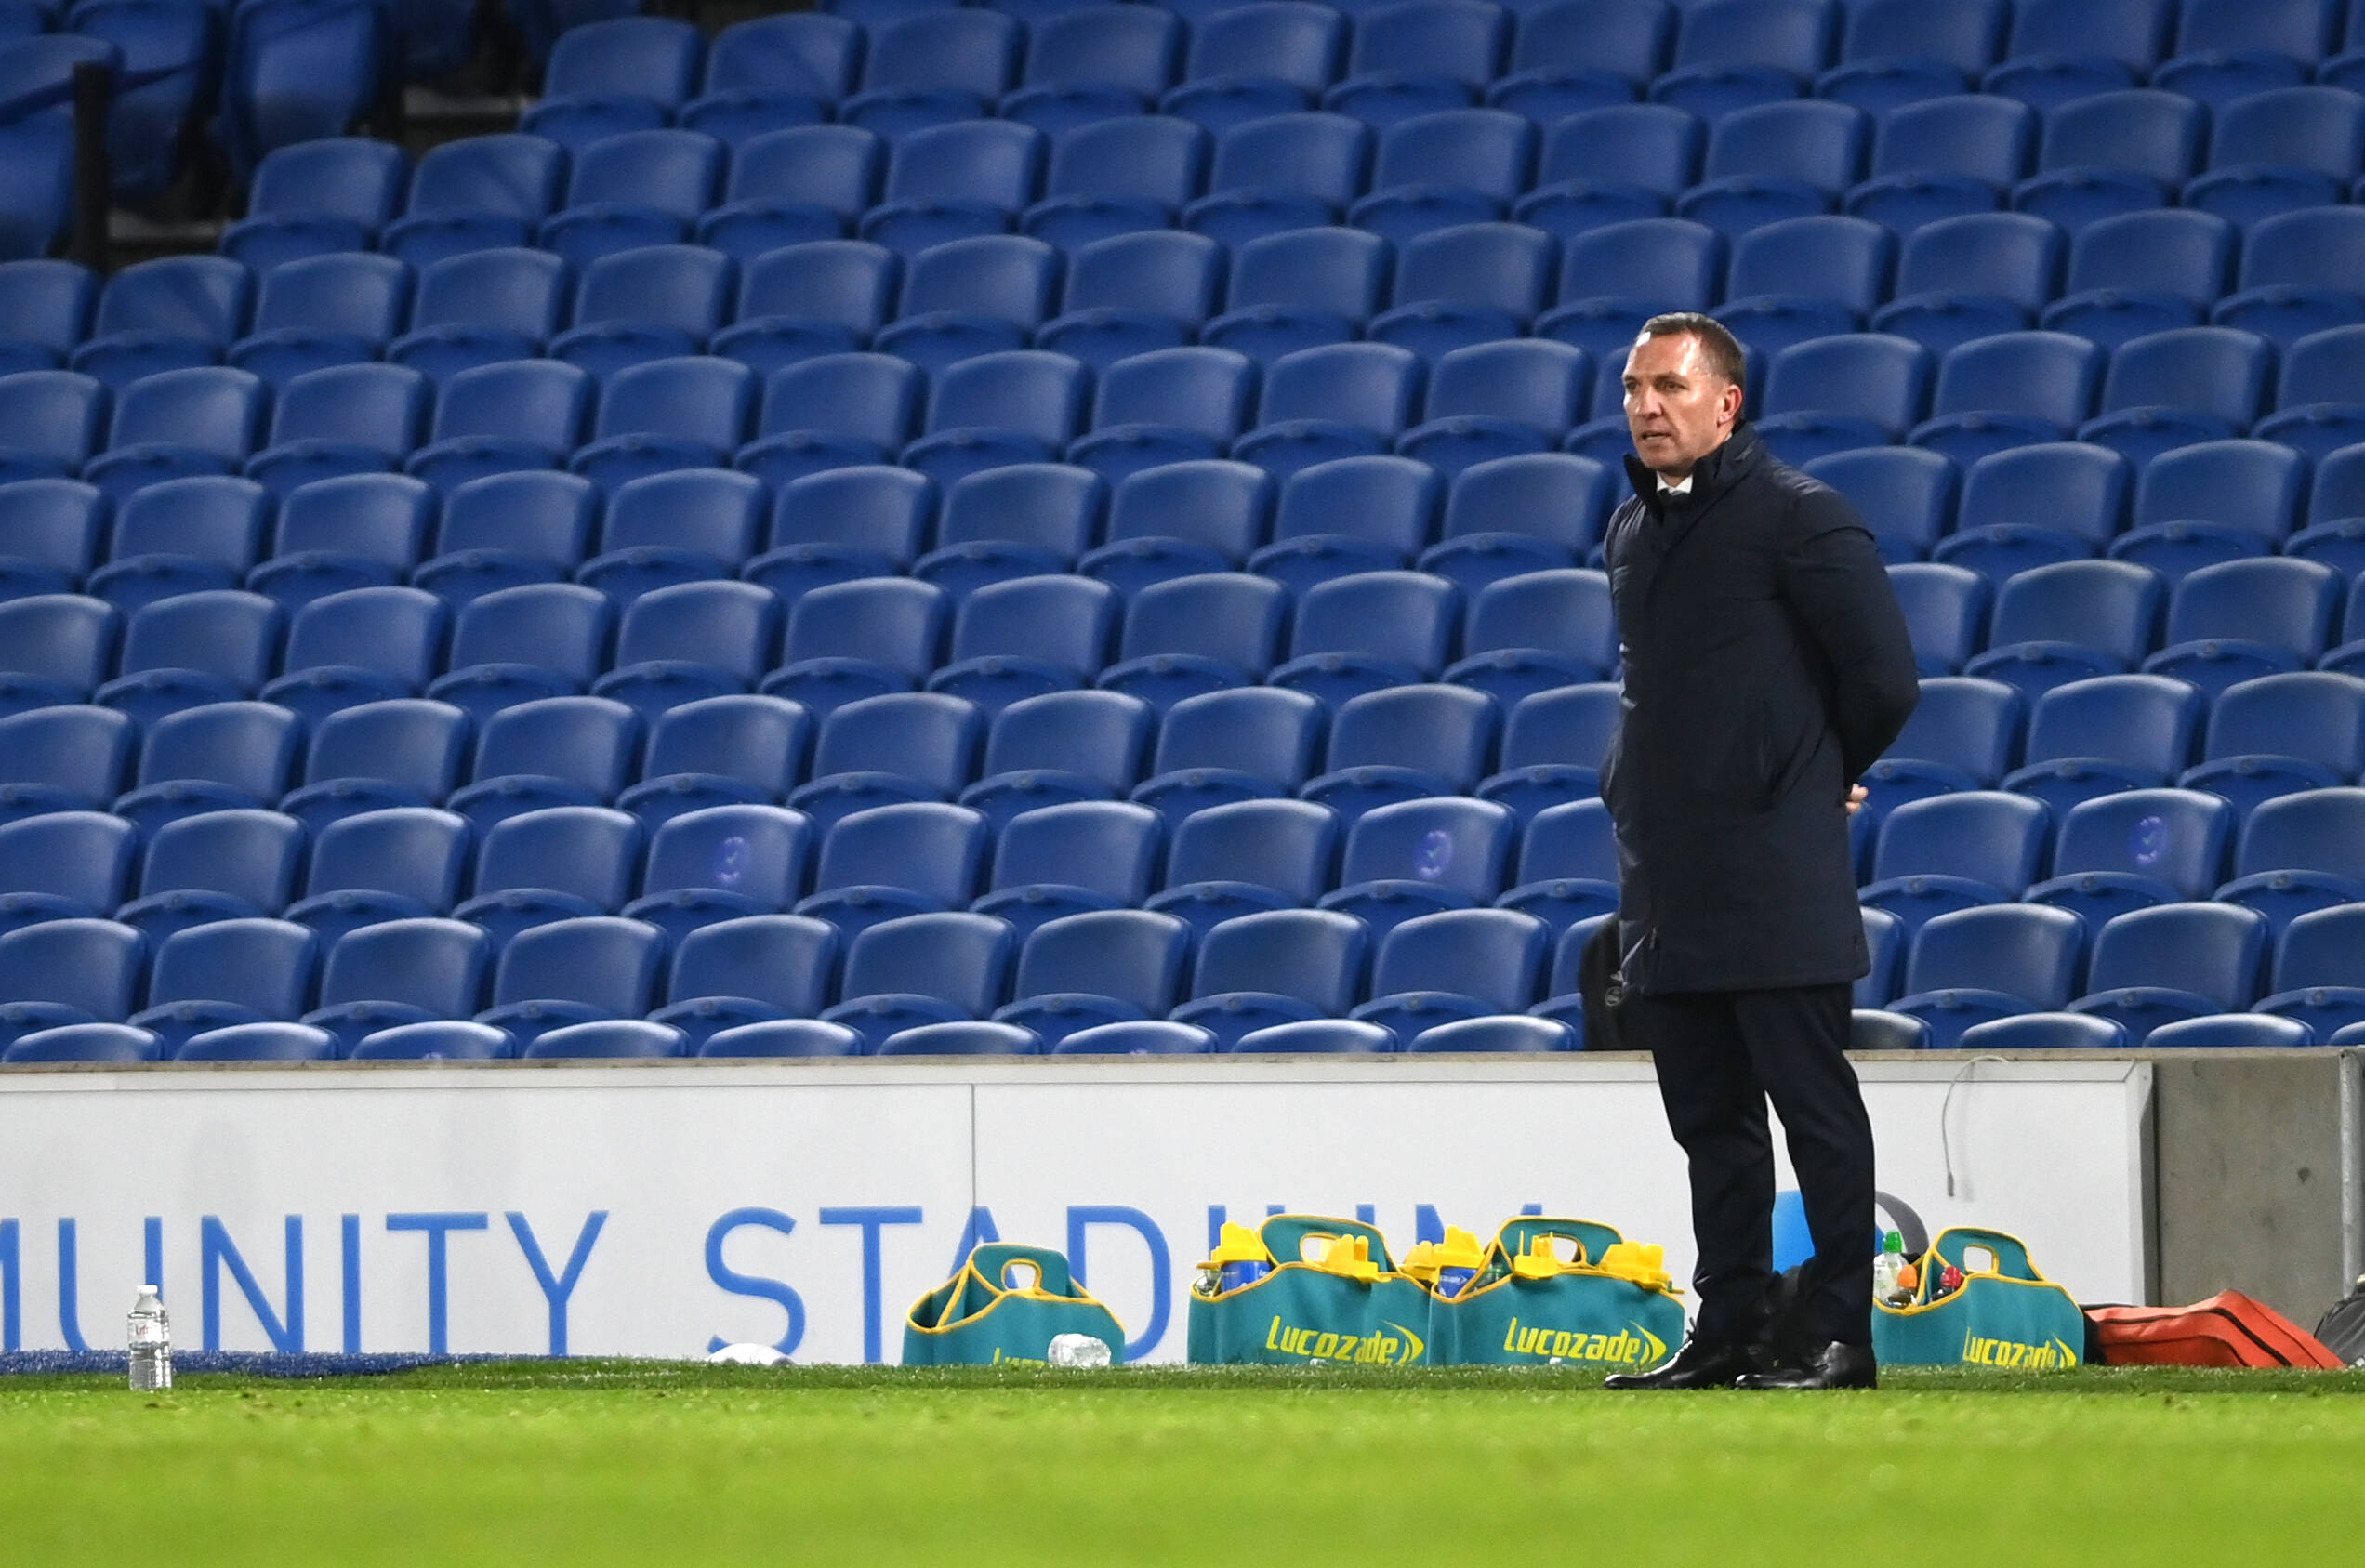 Leicester City manager, Brendan Rodgers, has been linked with the Tottenham Hotspur job.